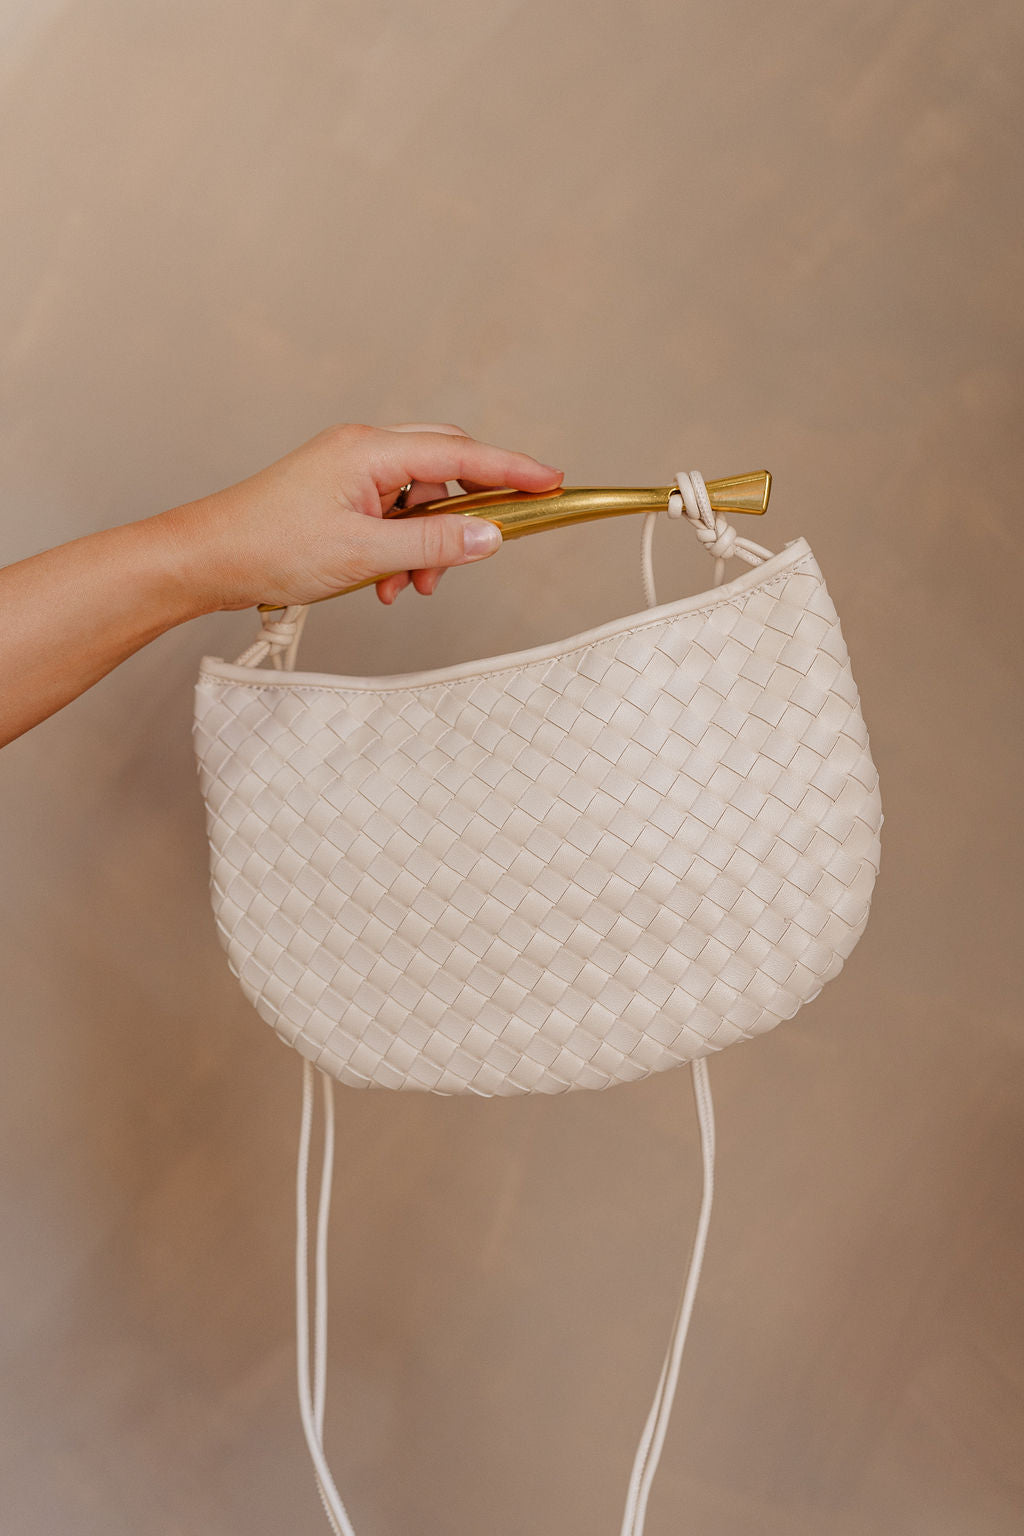 Hand is holding the Nadia Woven Purse on her shoulder. It features a cream woven body topped with a gold bar accent and cream straps.